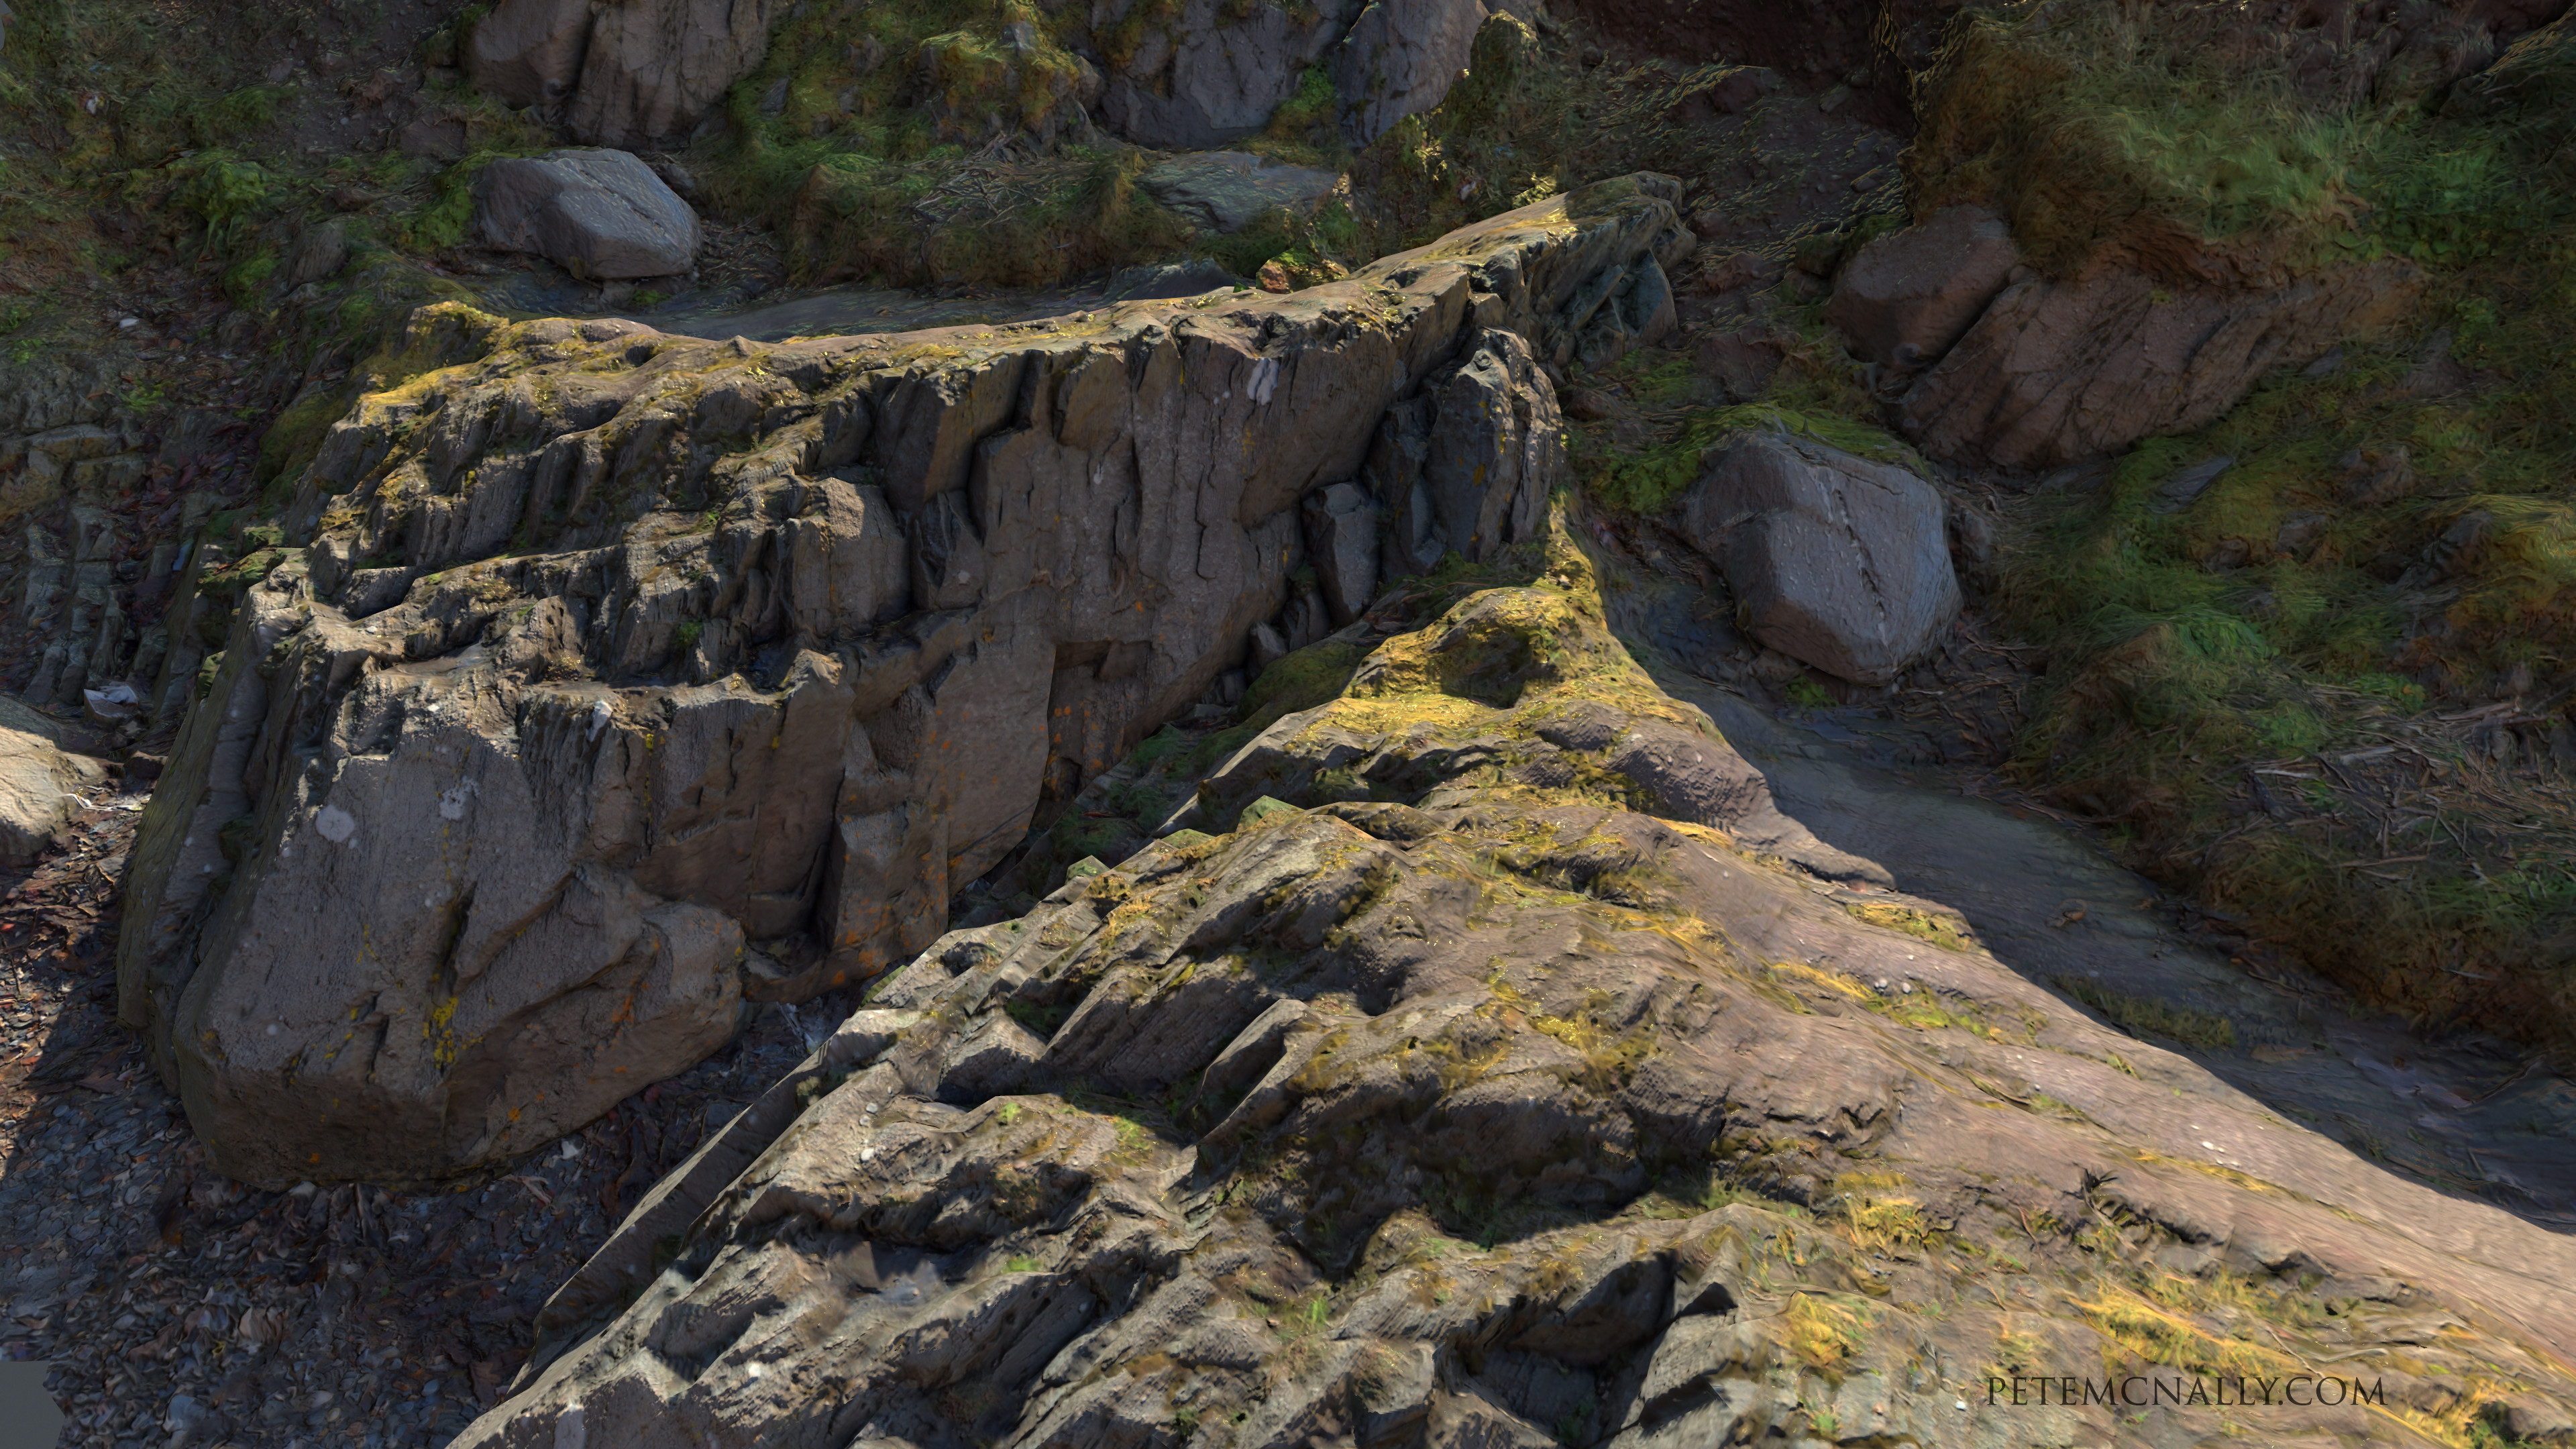 Rendered in real-time in Marmoset Toolbag 2